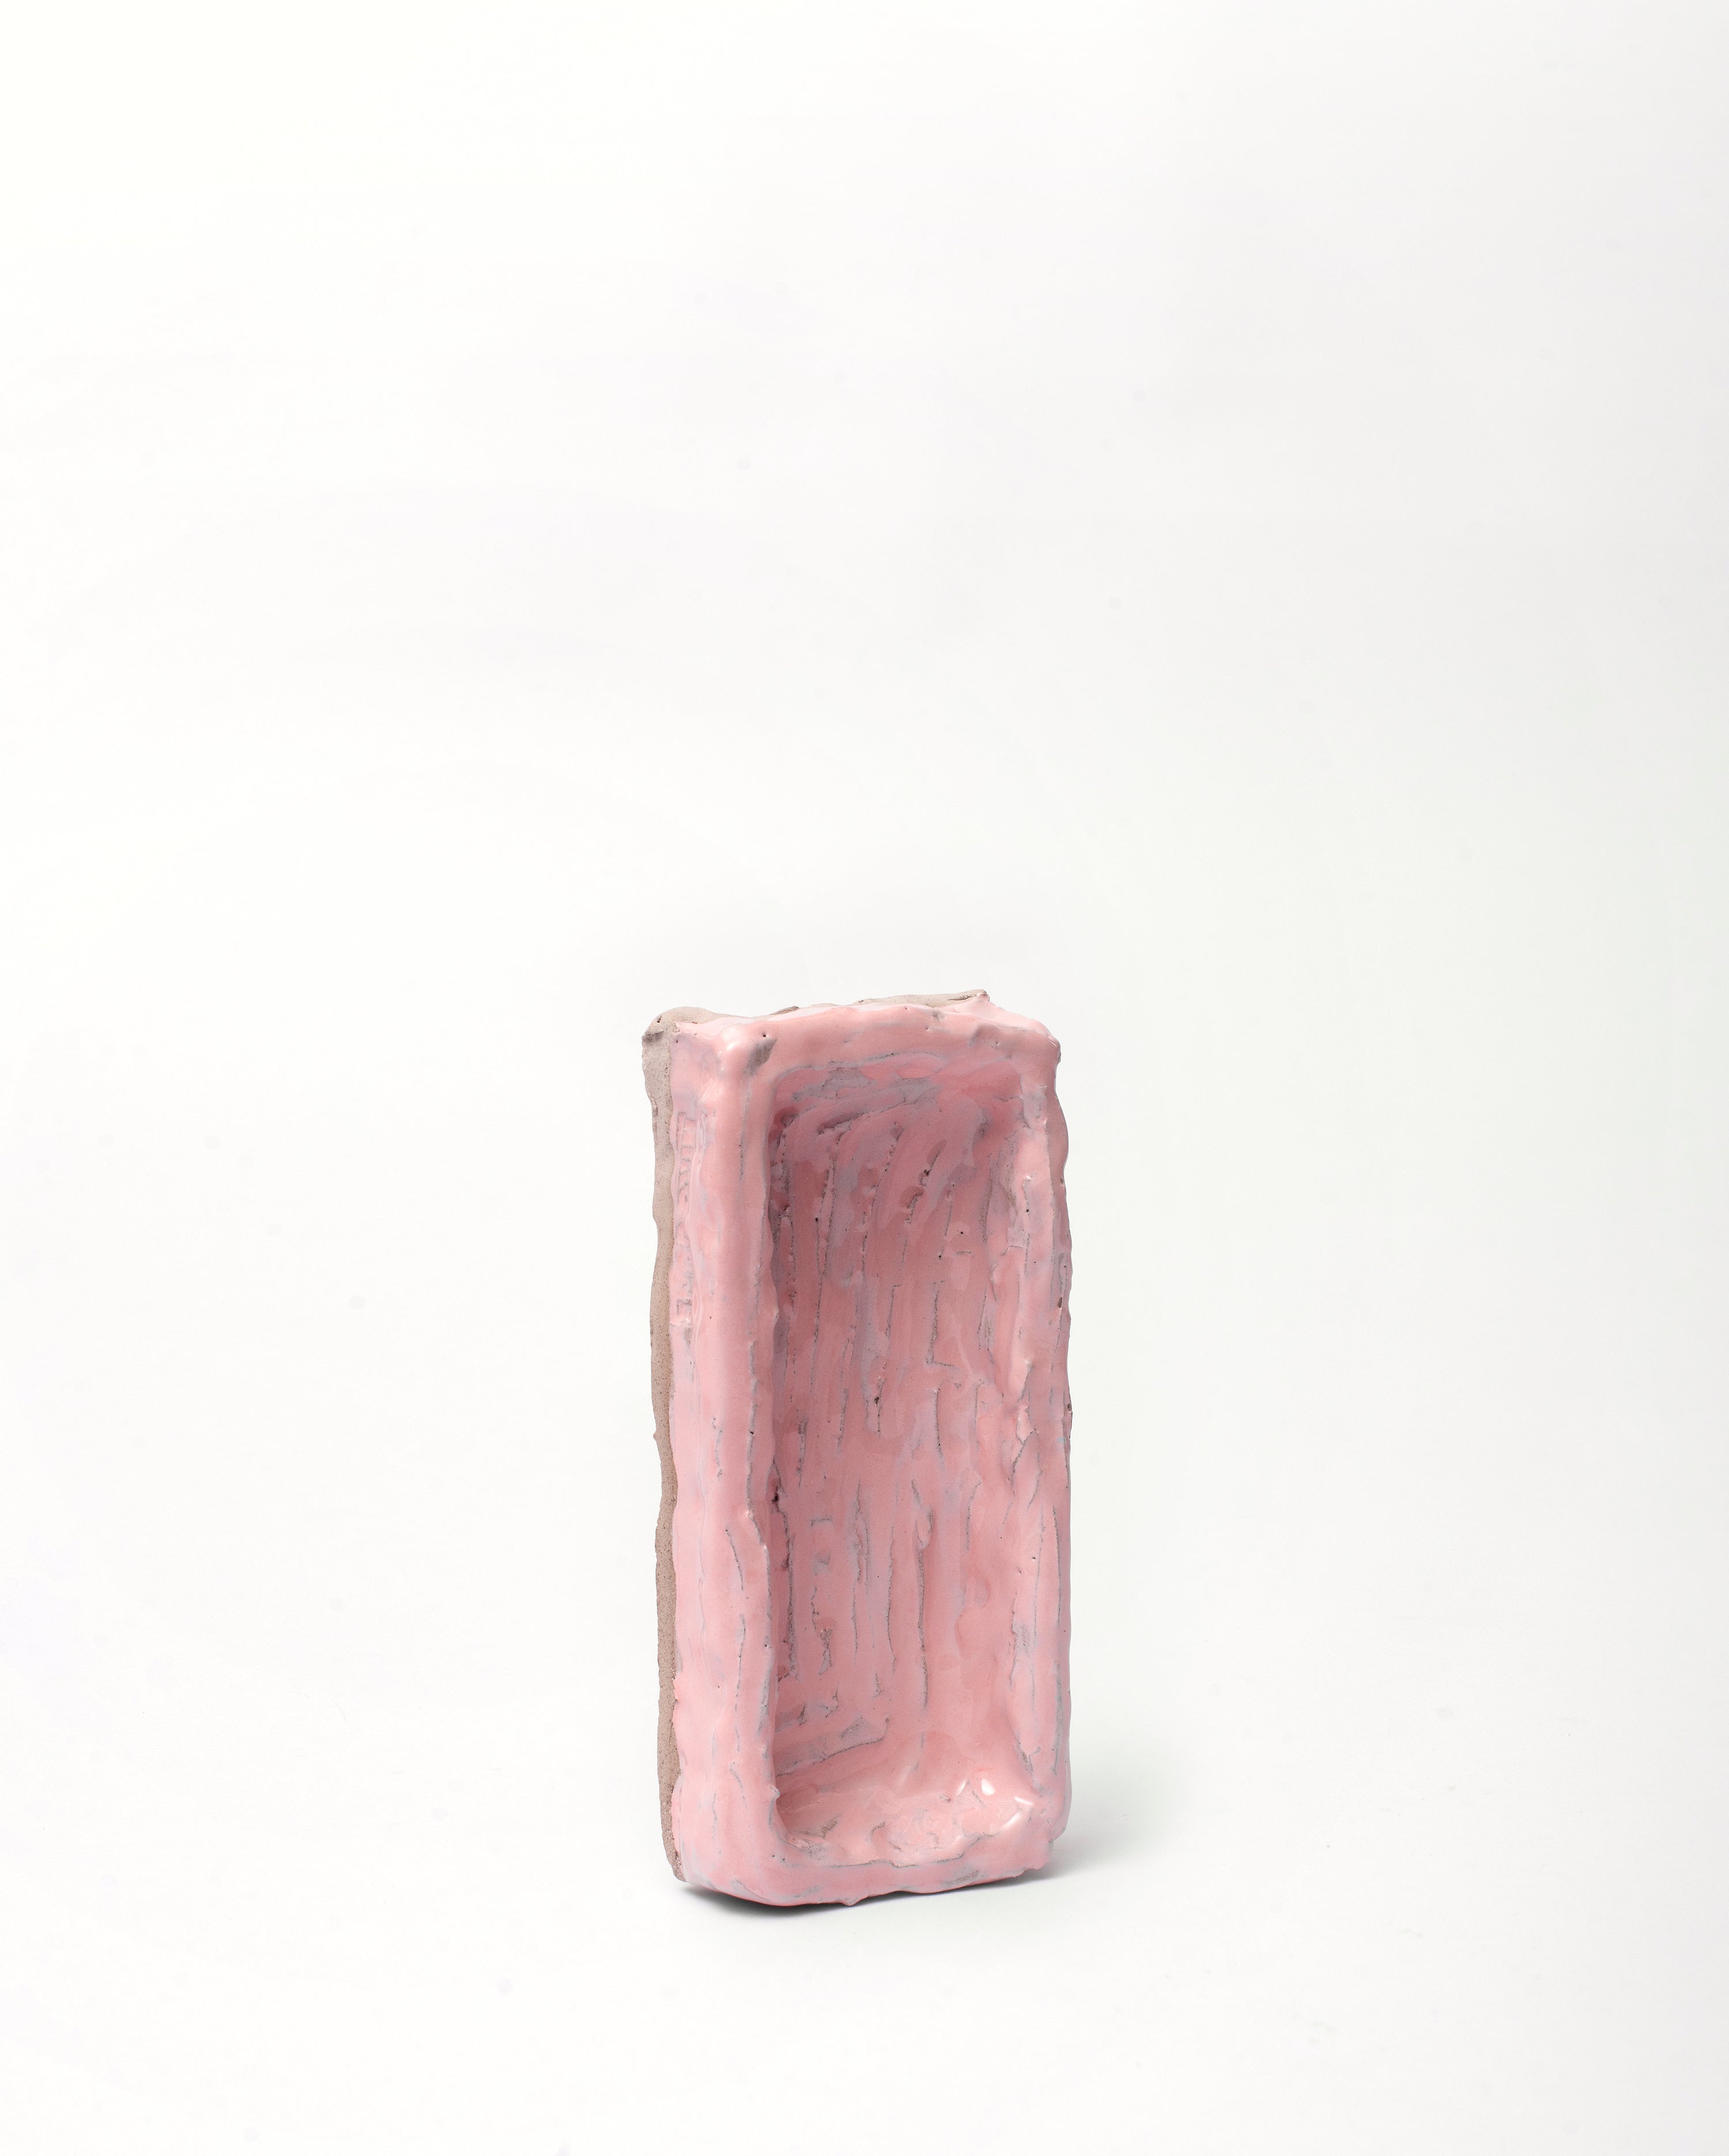 Handmade ceramic organizer object pink in vertical position on white background